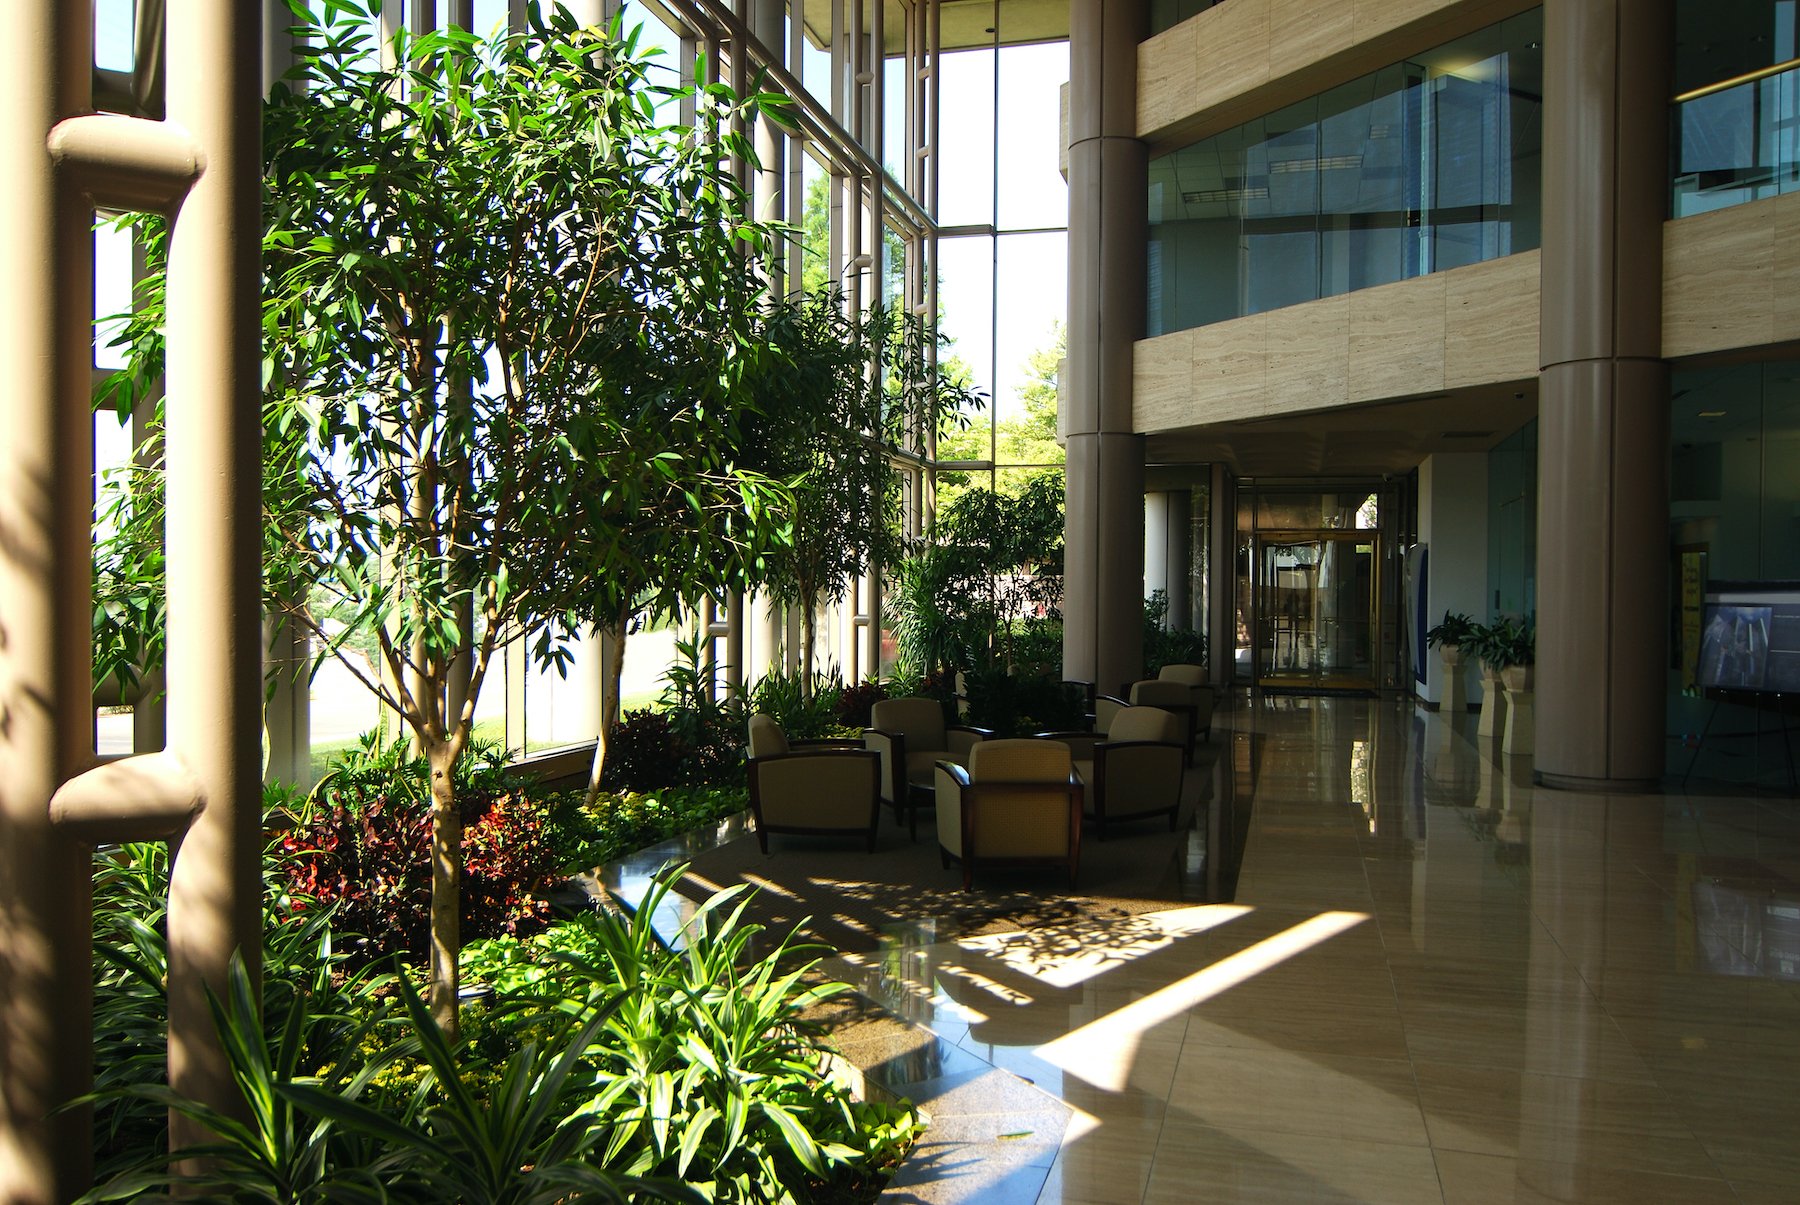 interior plantscape at an office